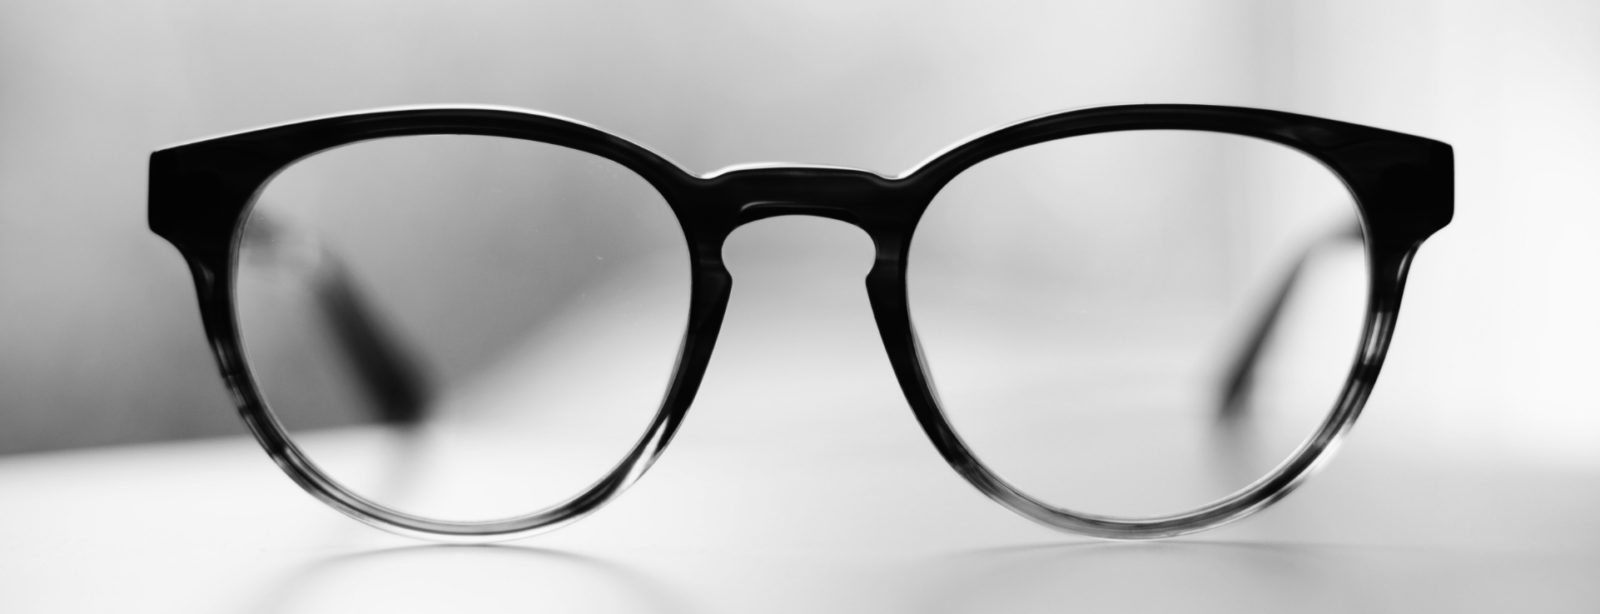 an image of glasses